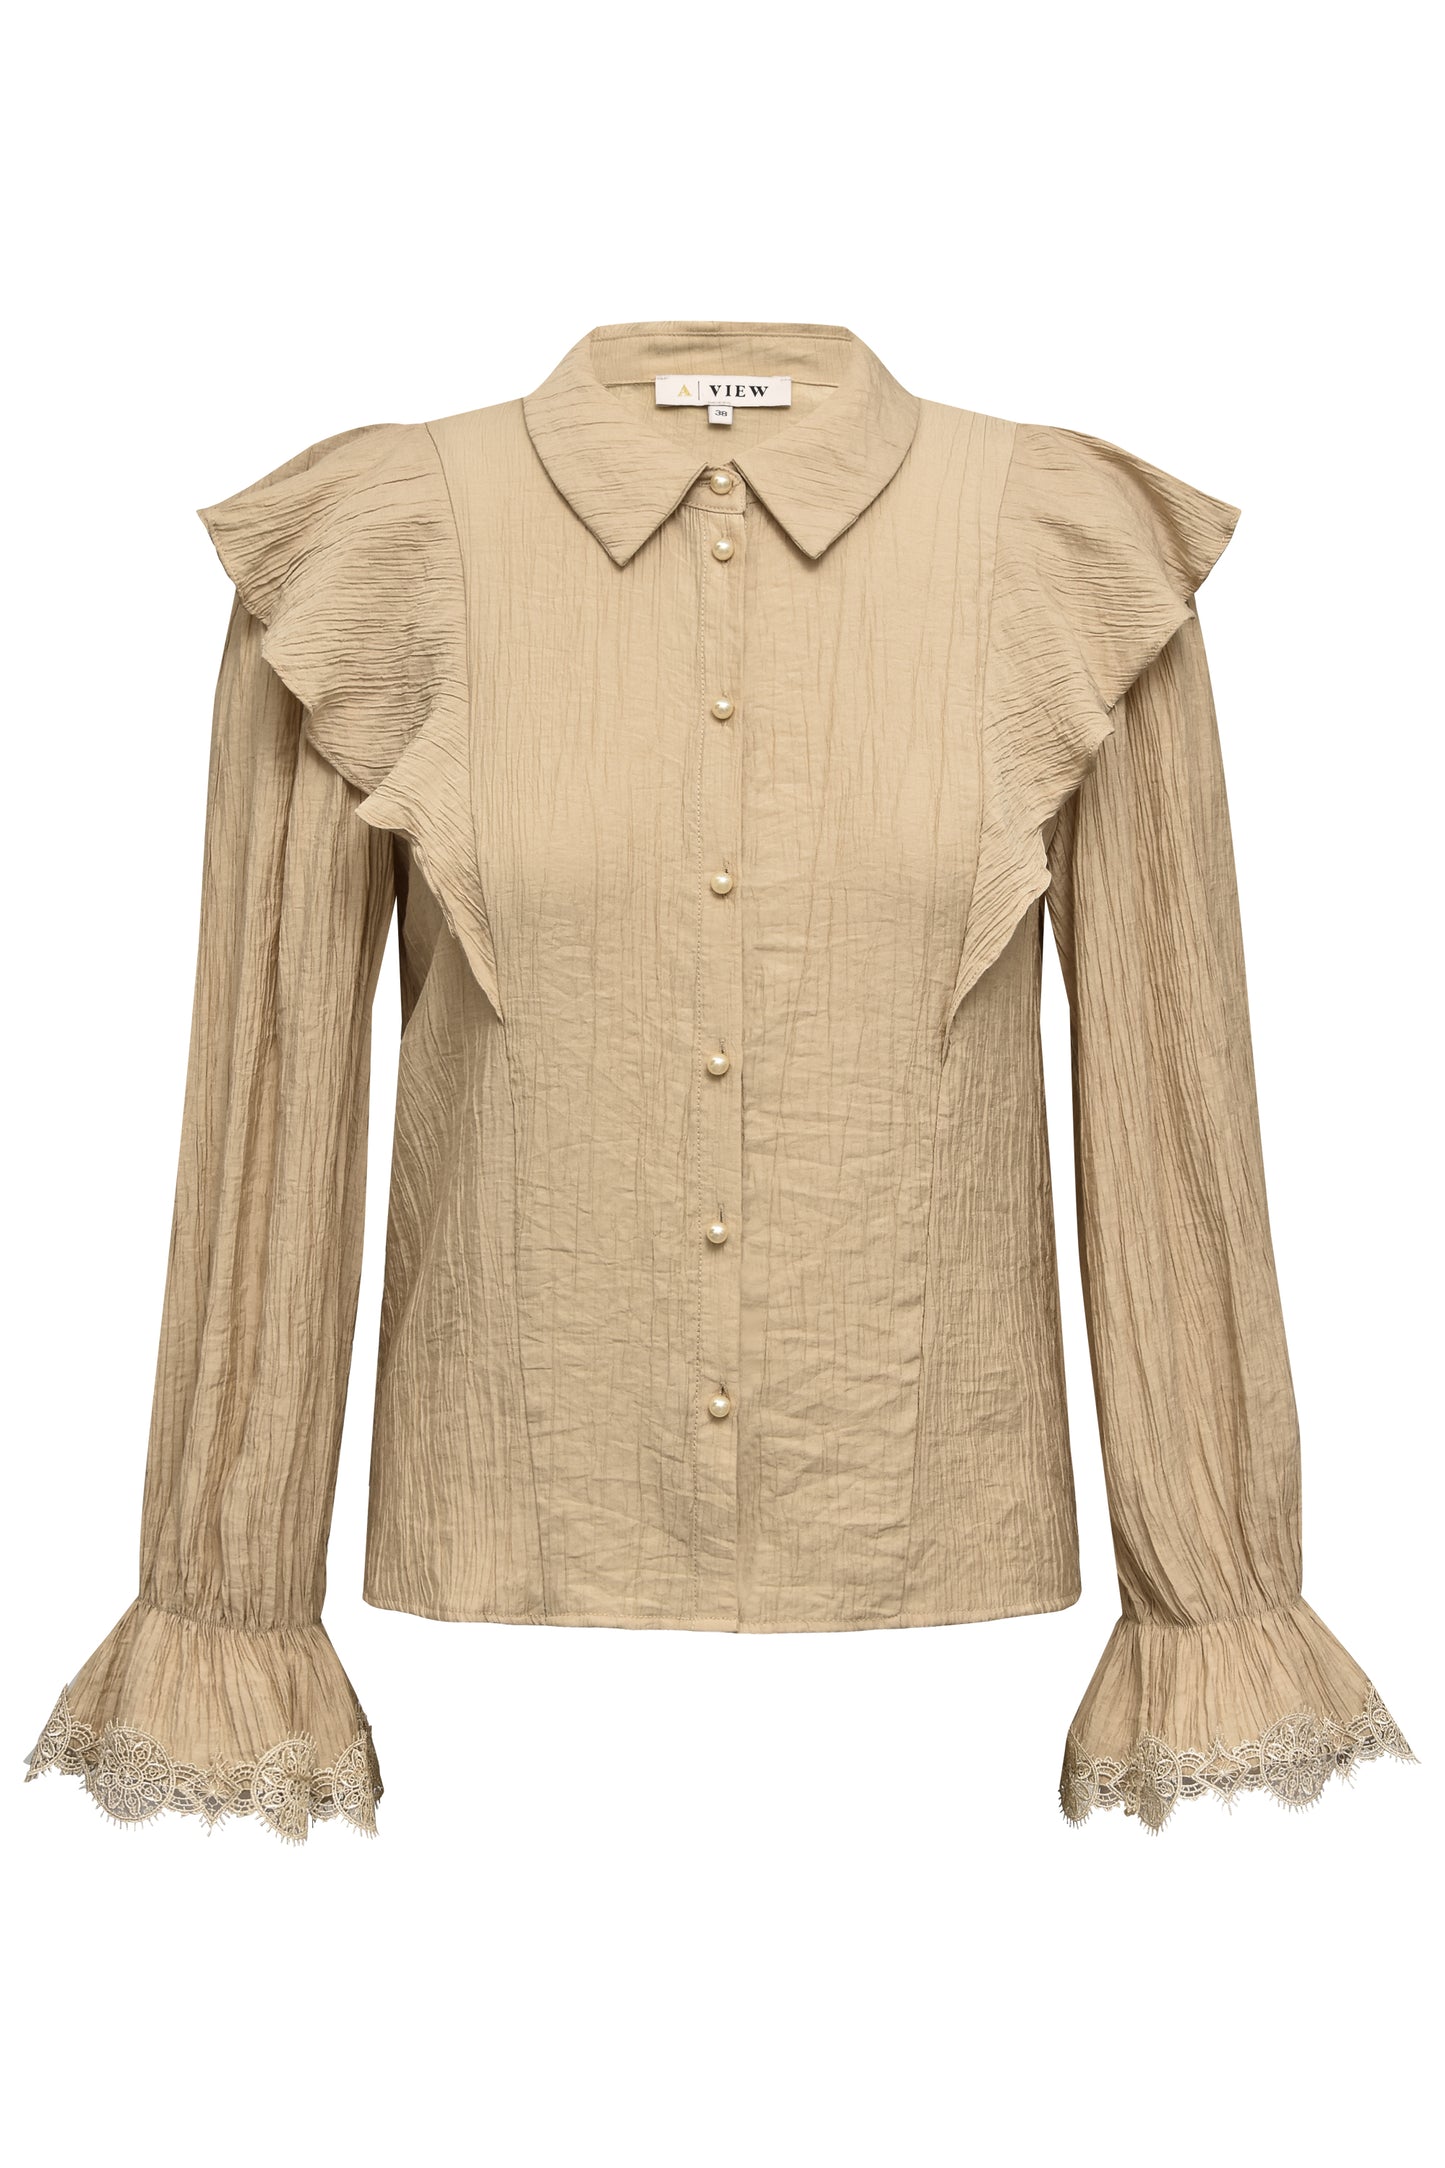 A-VIEW - Sophie shirt - Sand